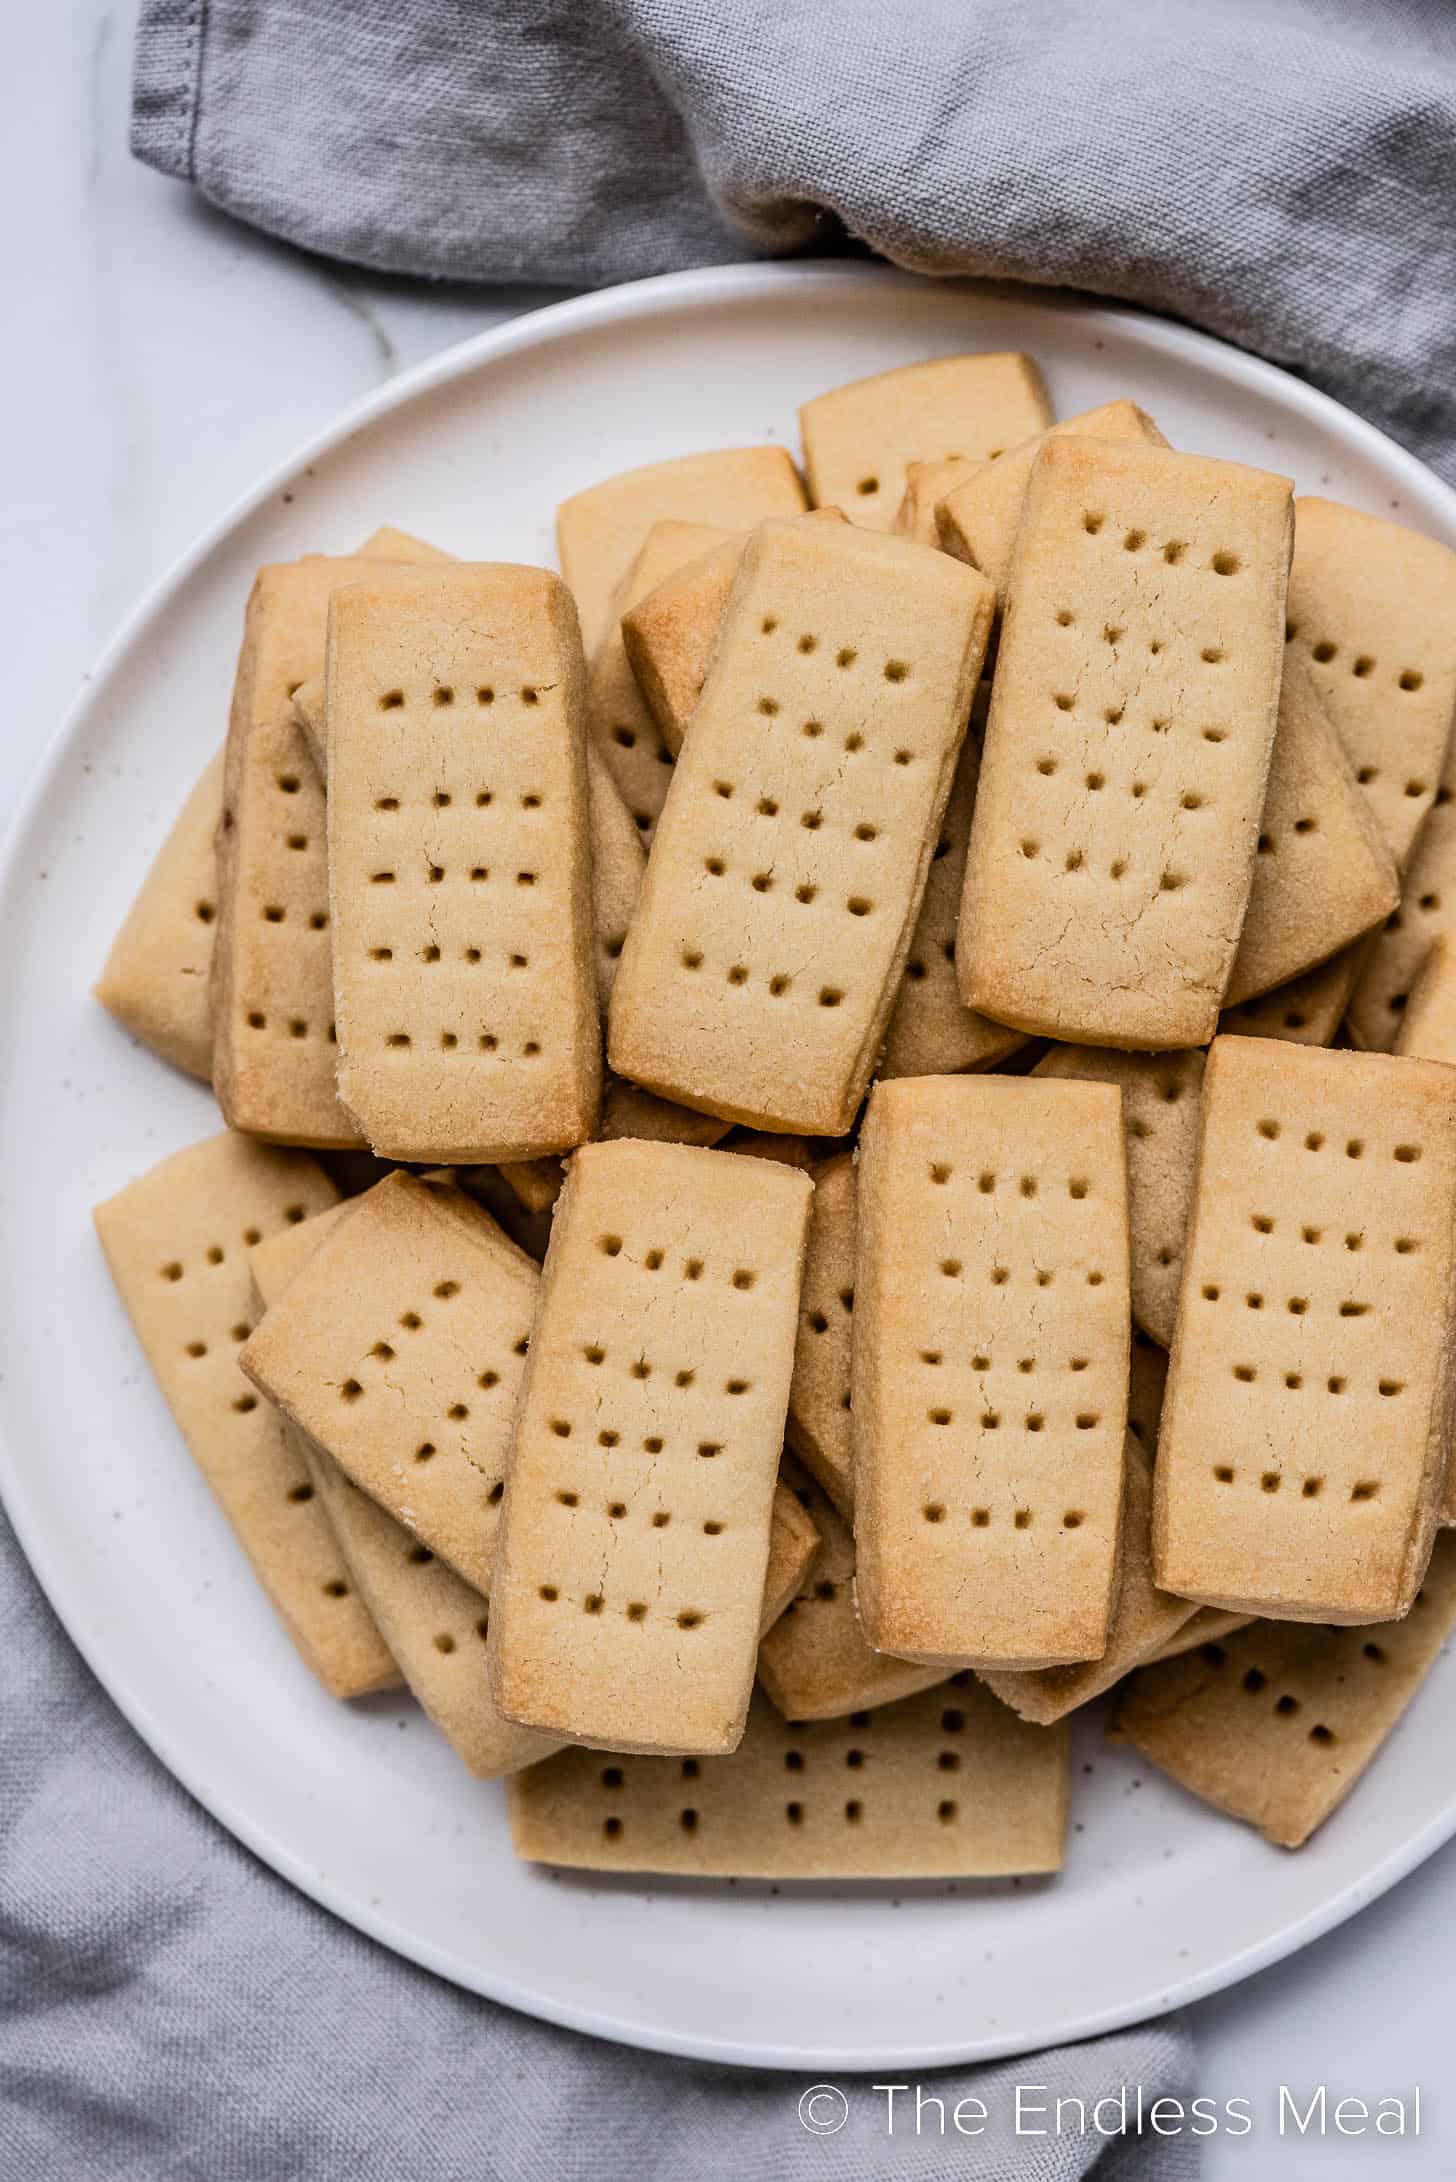 Scottish Shortbread Cookies piled high on a plate